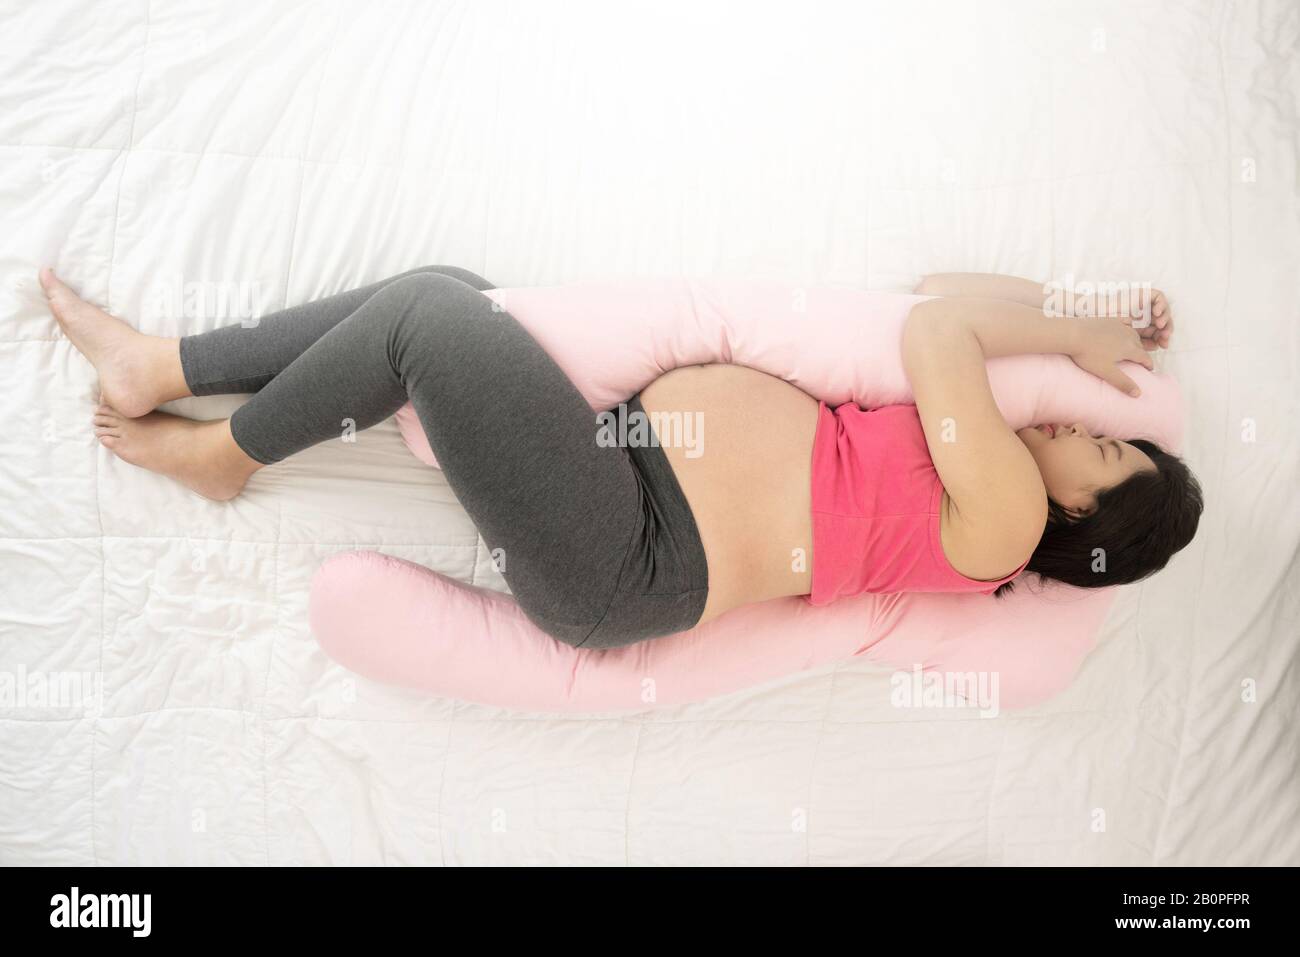 https://c8.alamy.com/comp/2B0PFPR/happy-pregnant-woman-sleeping-on-bed-in-bedroom-at-home-for-resting-and-stress-relief-the-young-expecting-mother-holding-baby-in-pregnant-belly-mate-2B0PFPR.jpg